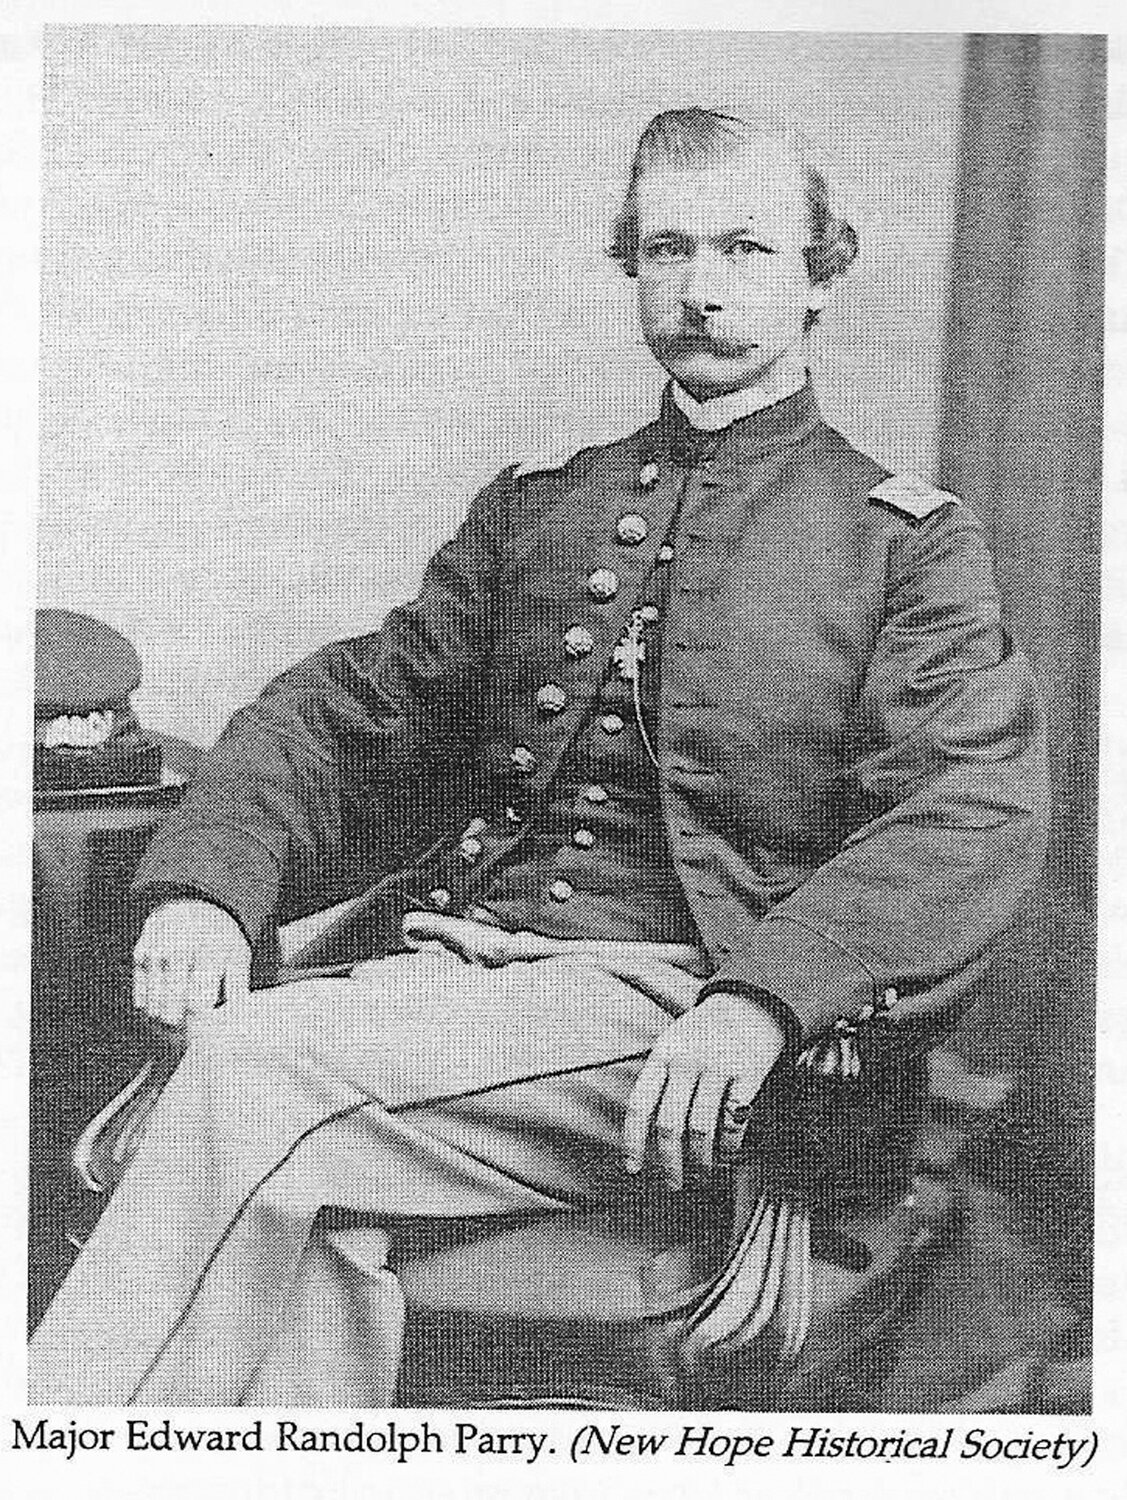 Major Edward Randolph Parry commanded two forts during the Civil War.